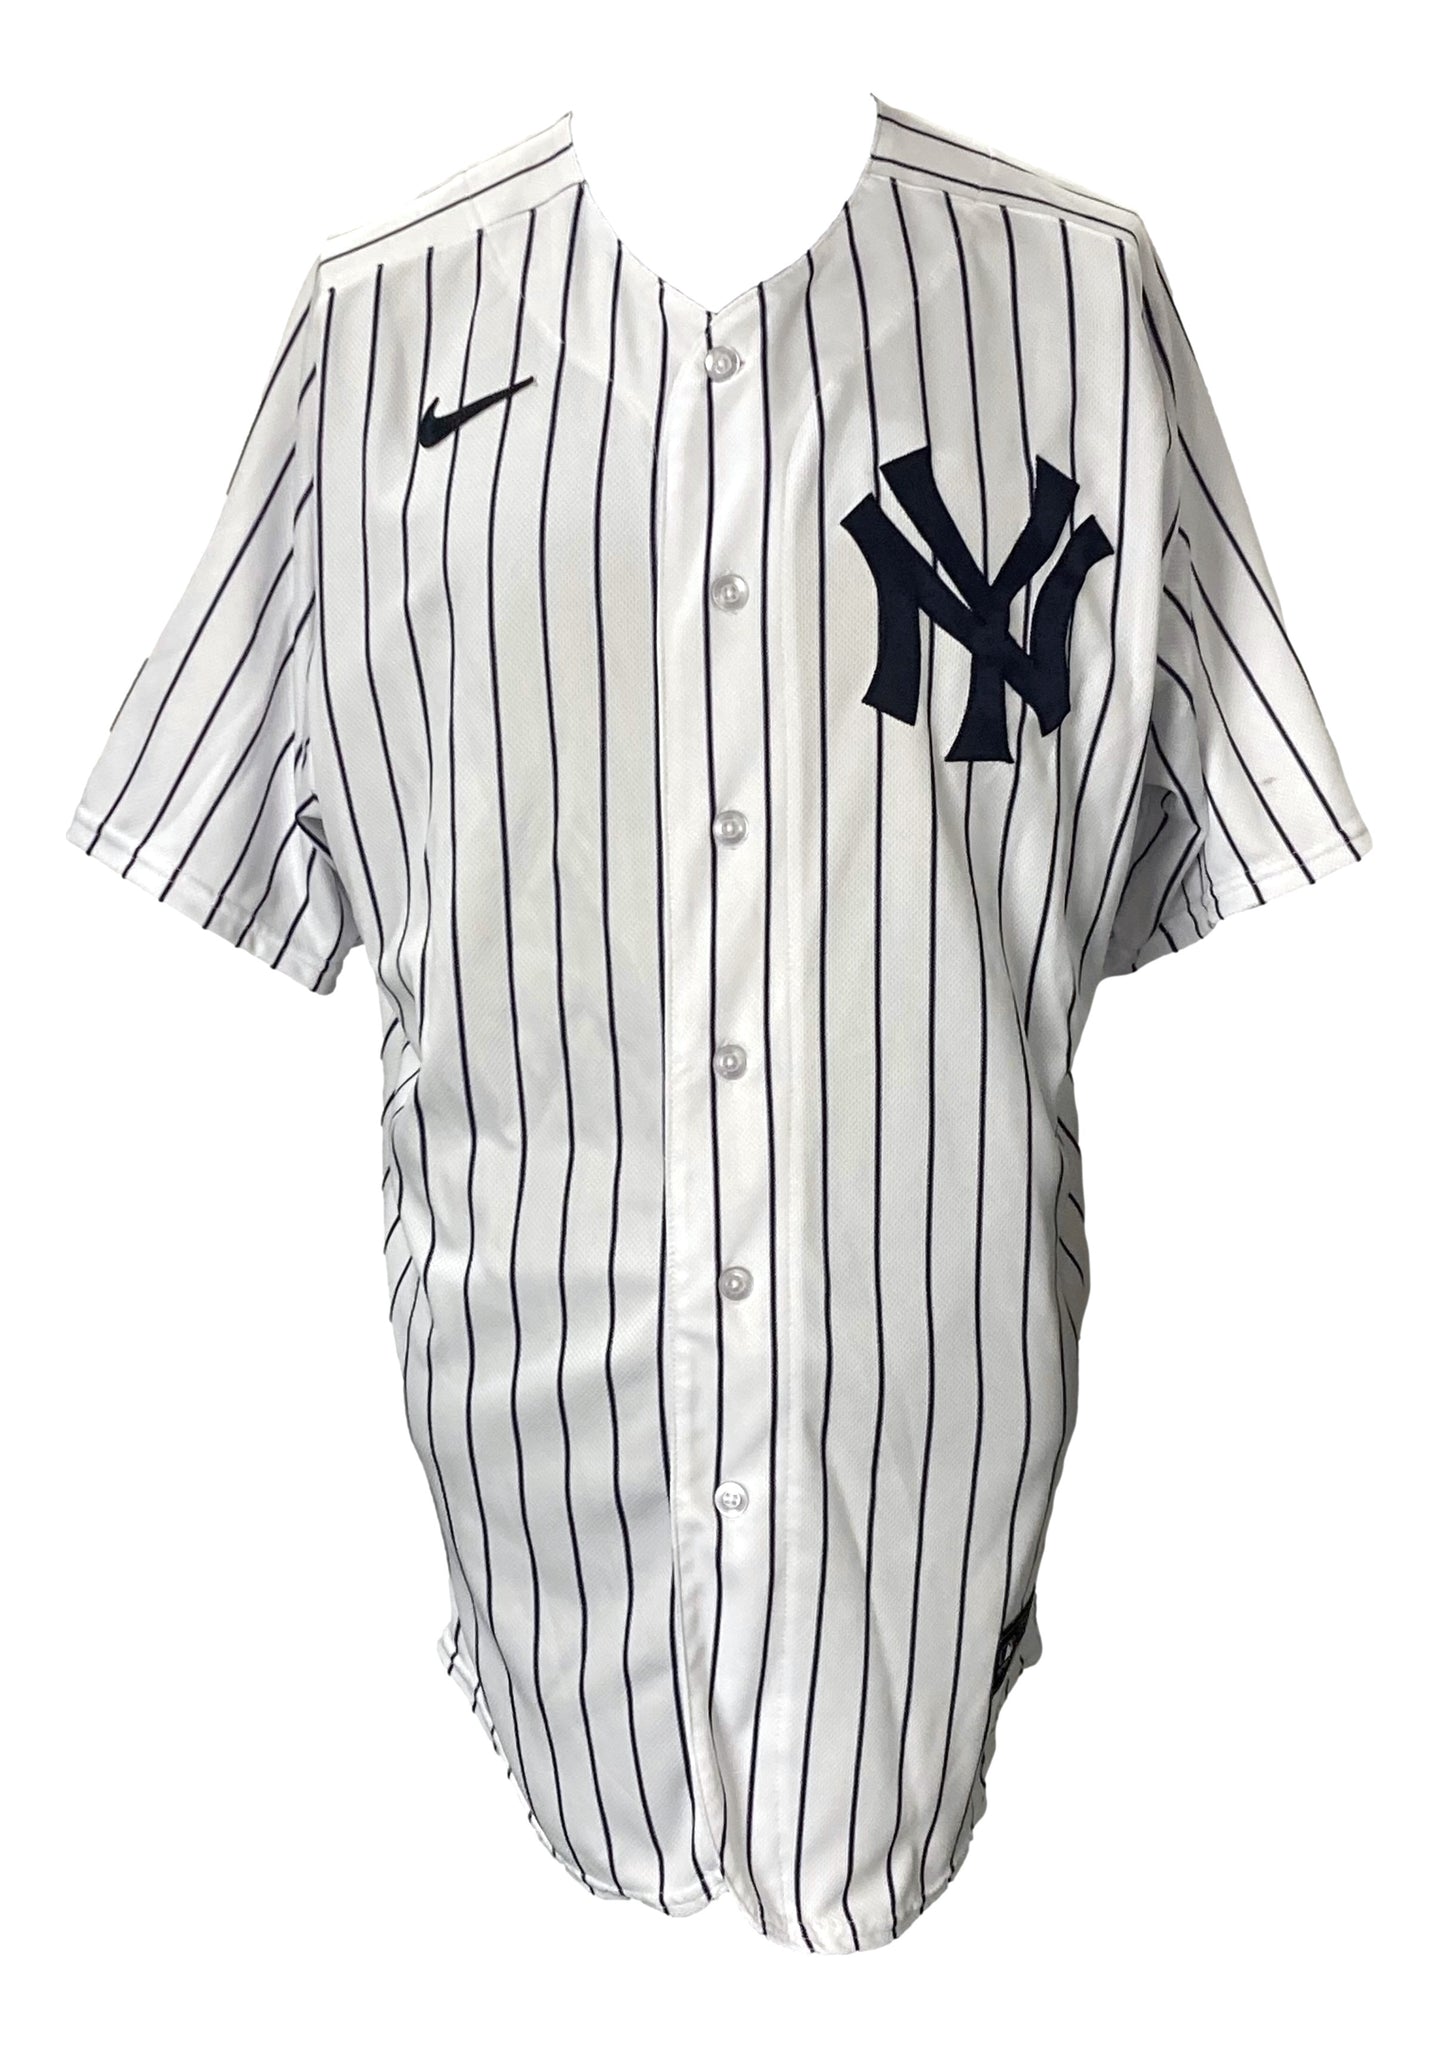 Anthony Rizzo Game Used New York Yankees Jersey 5/8/2023 Fanatics+